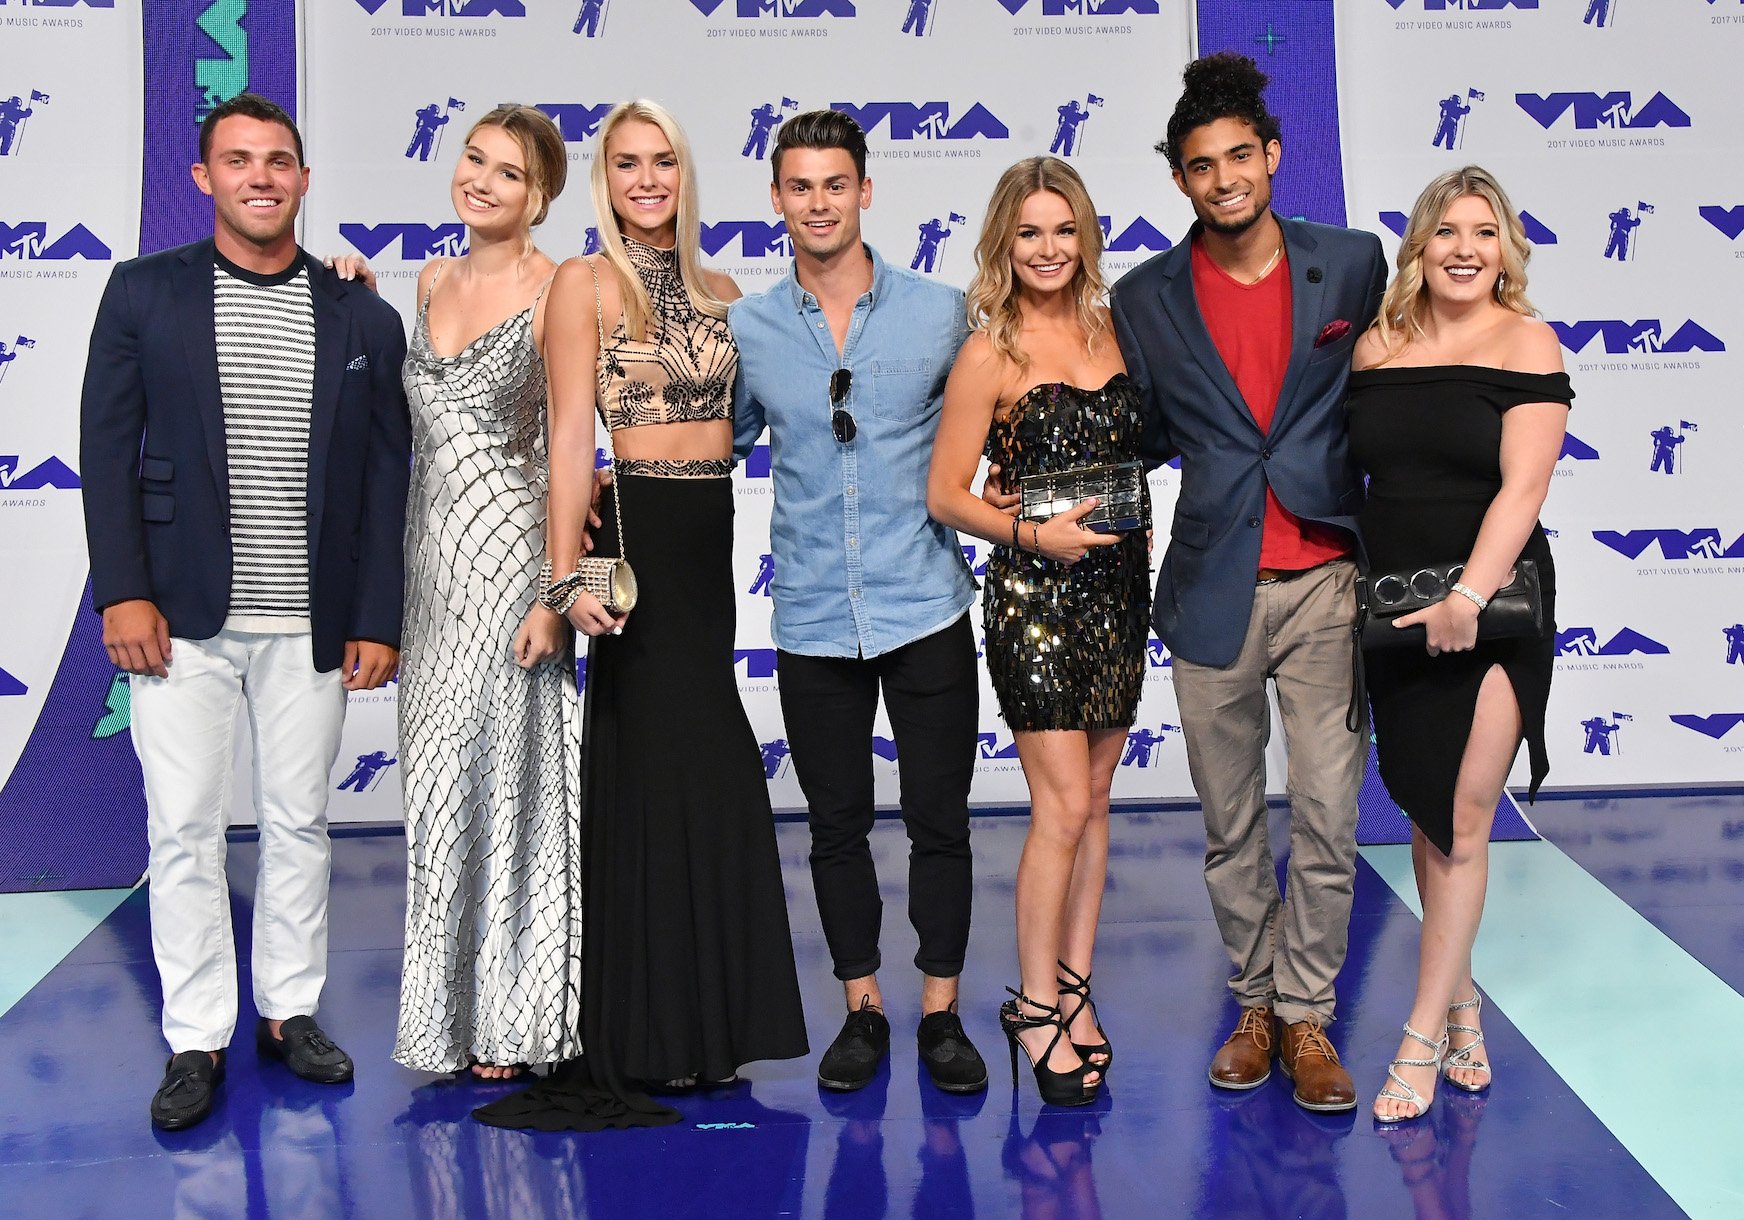 The 'Siesta Key' cast dressed up for the 2017 MTV Video Music Awards